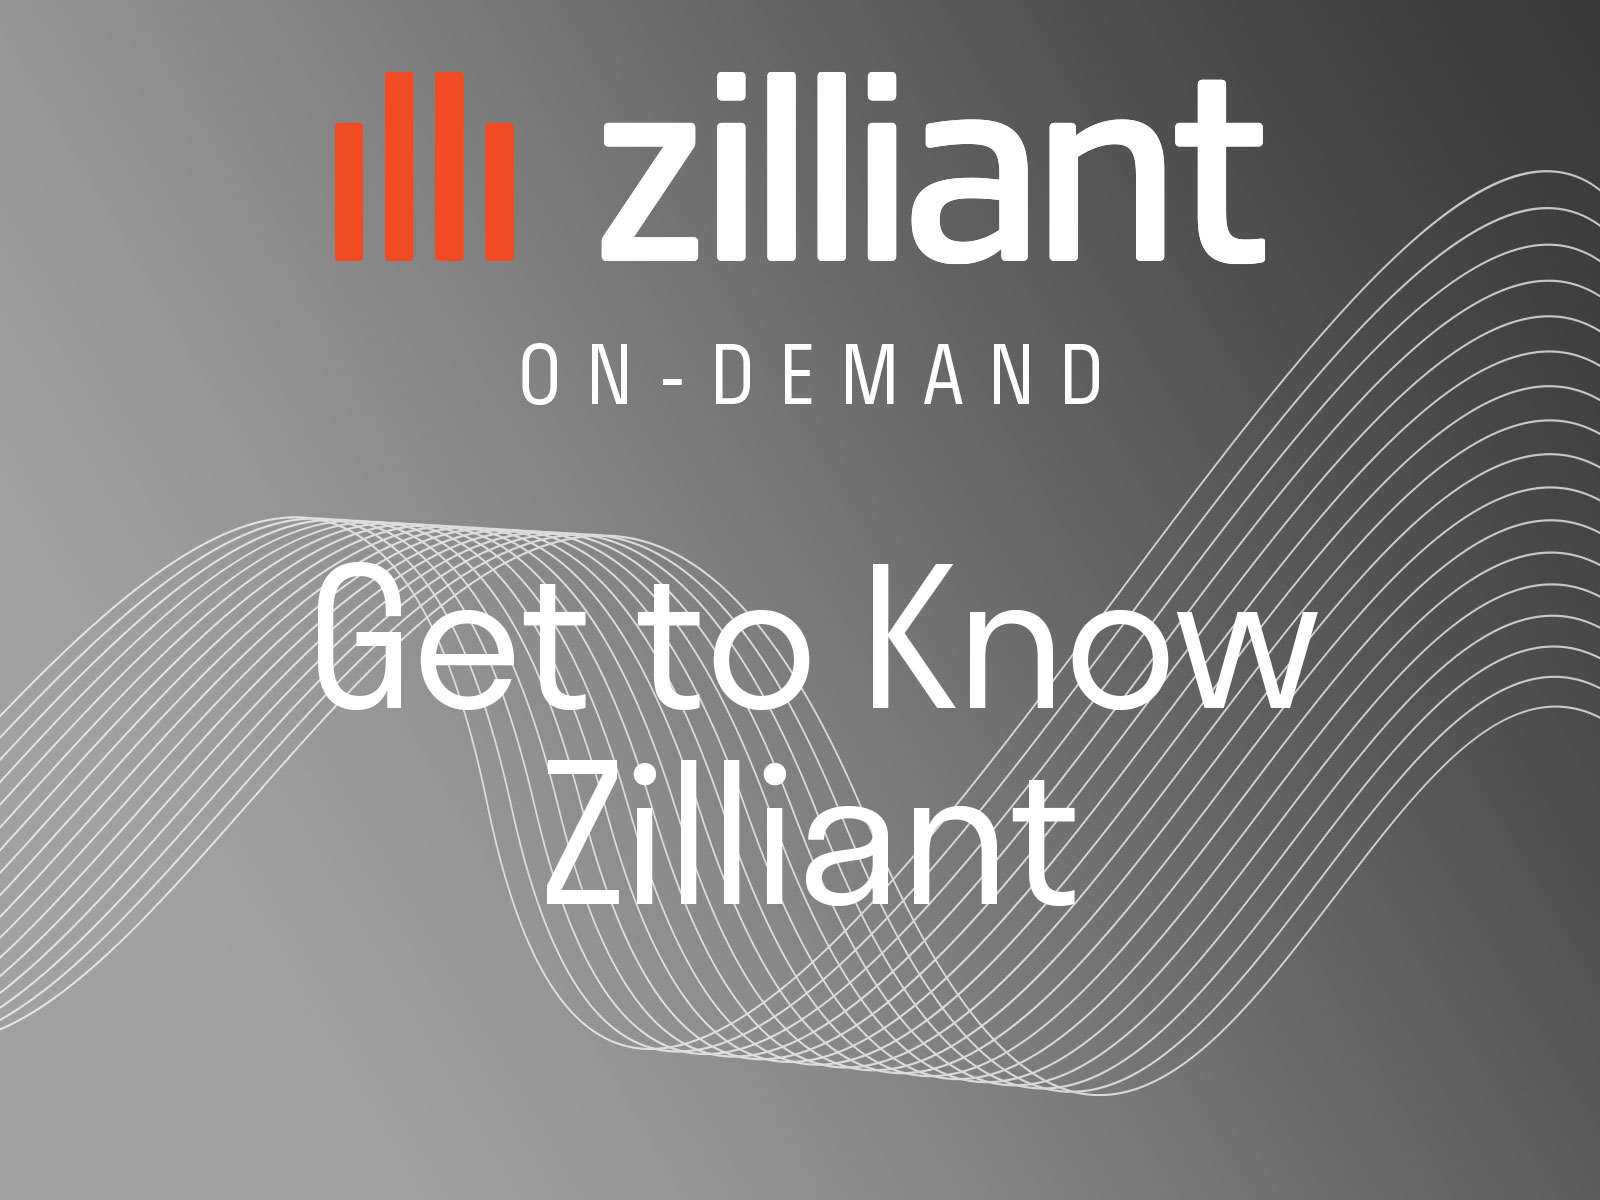 Get to Know Zilliant Session